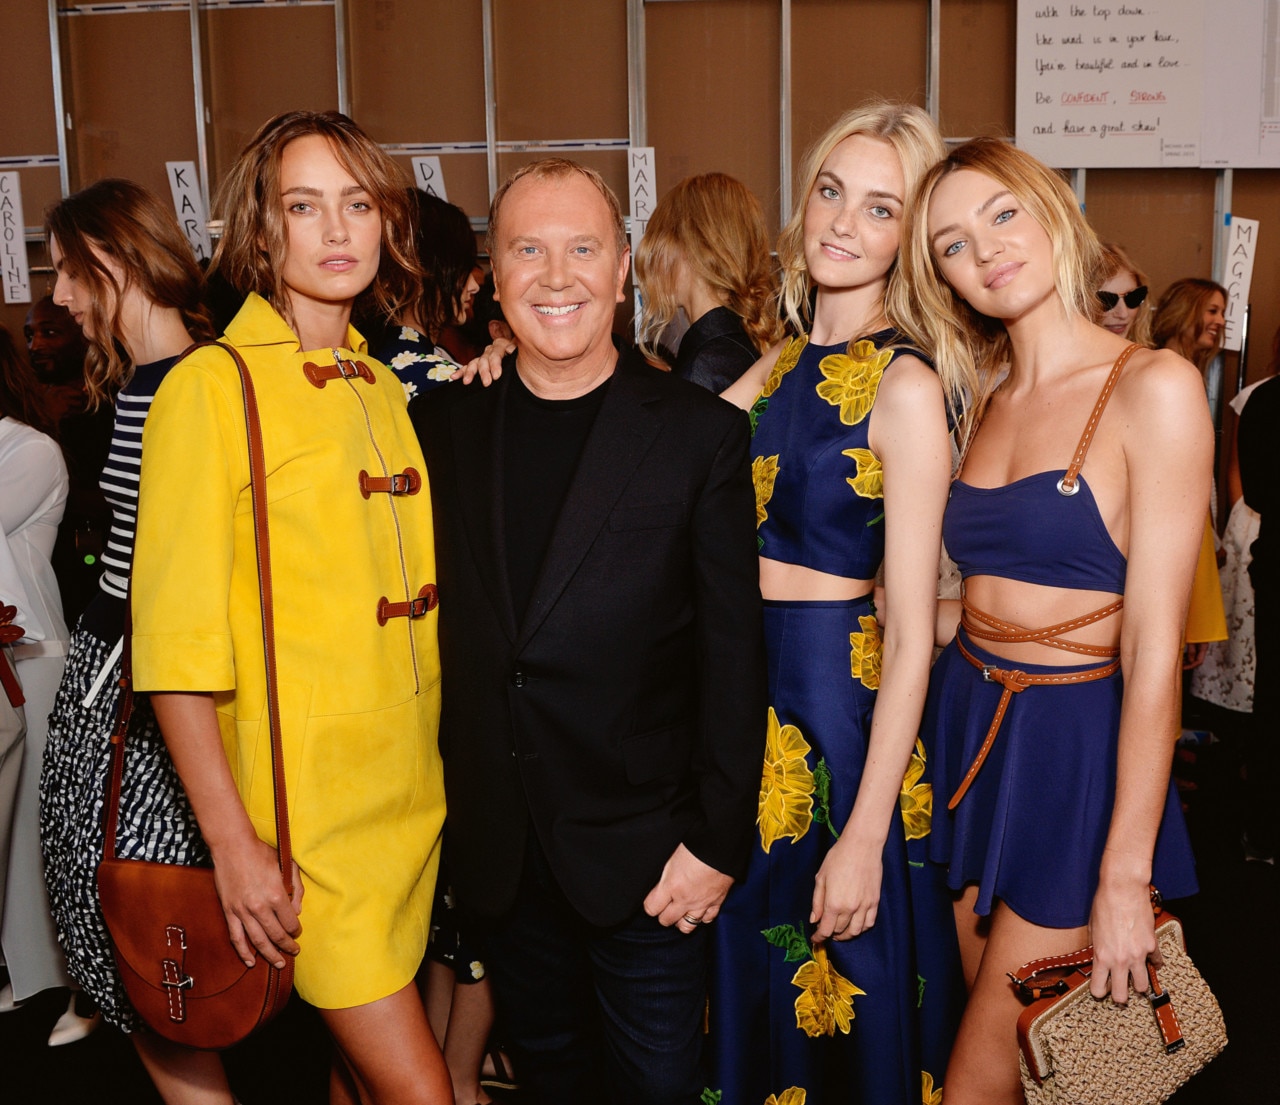 How Michael Kors Became a Billionaire, and What He's up to Now